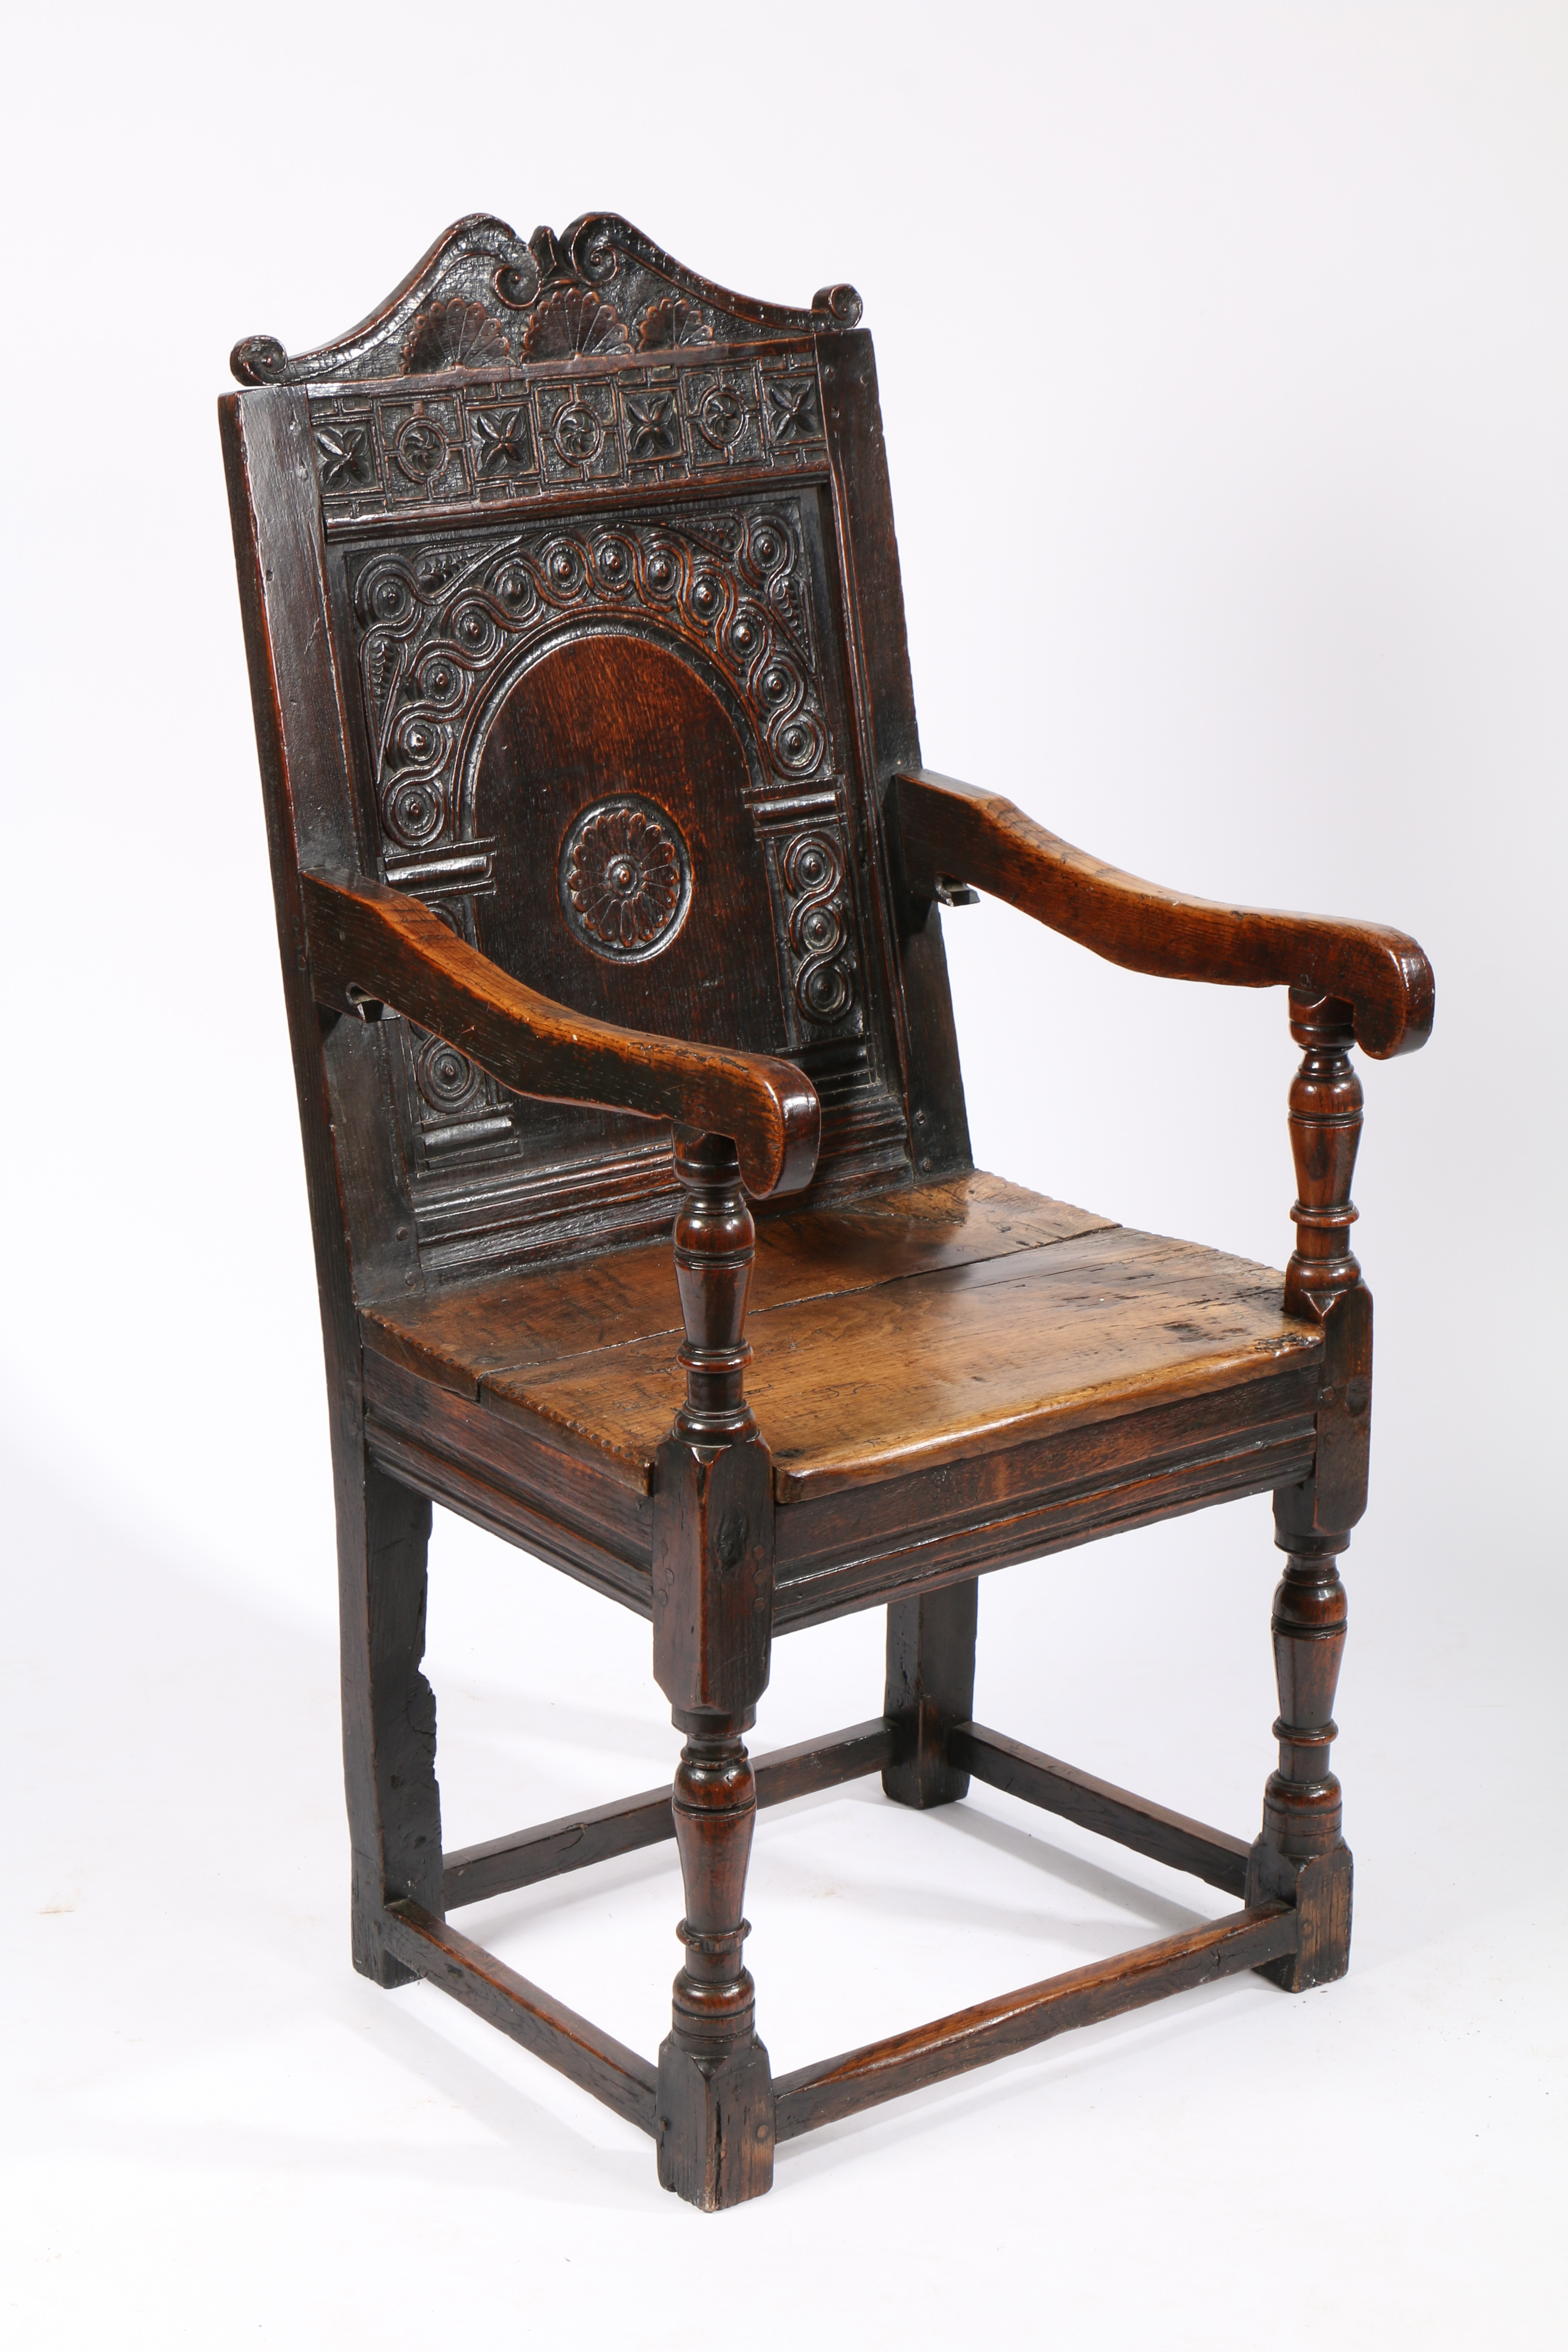 A CHARLES I OAK PANEL-BACK OPEN ARMCHAIR, CIRCA 1640. - Image 3 of 6